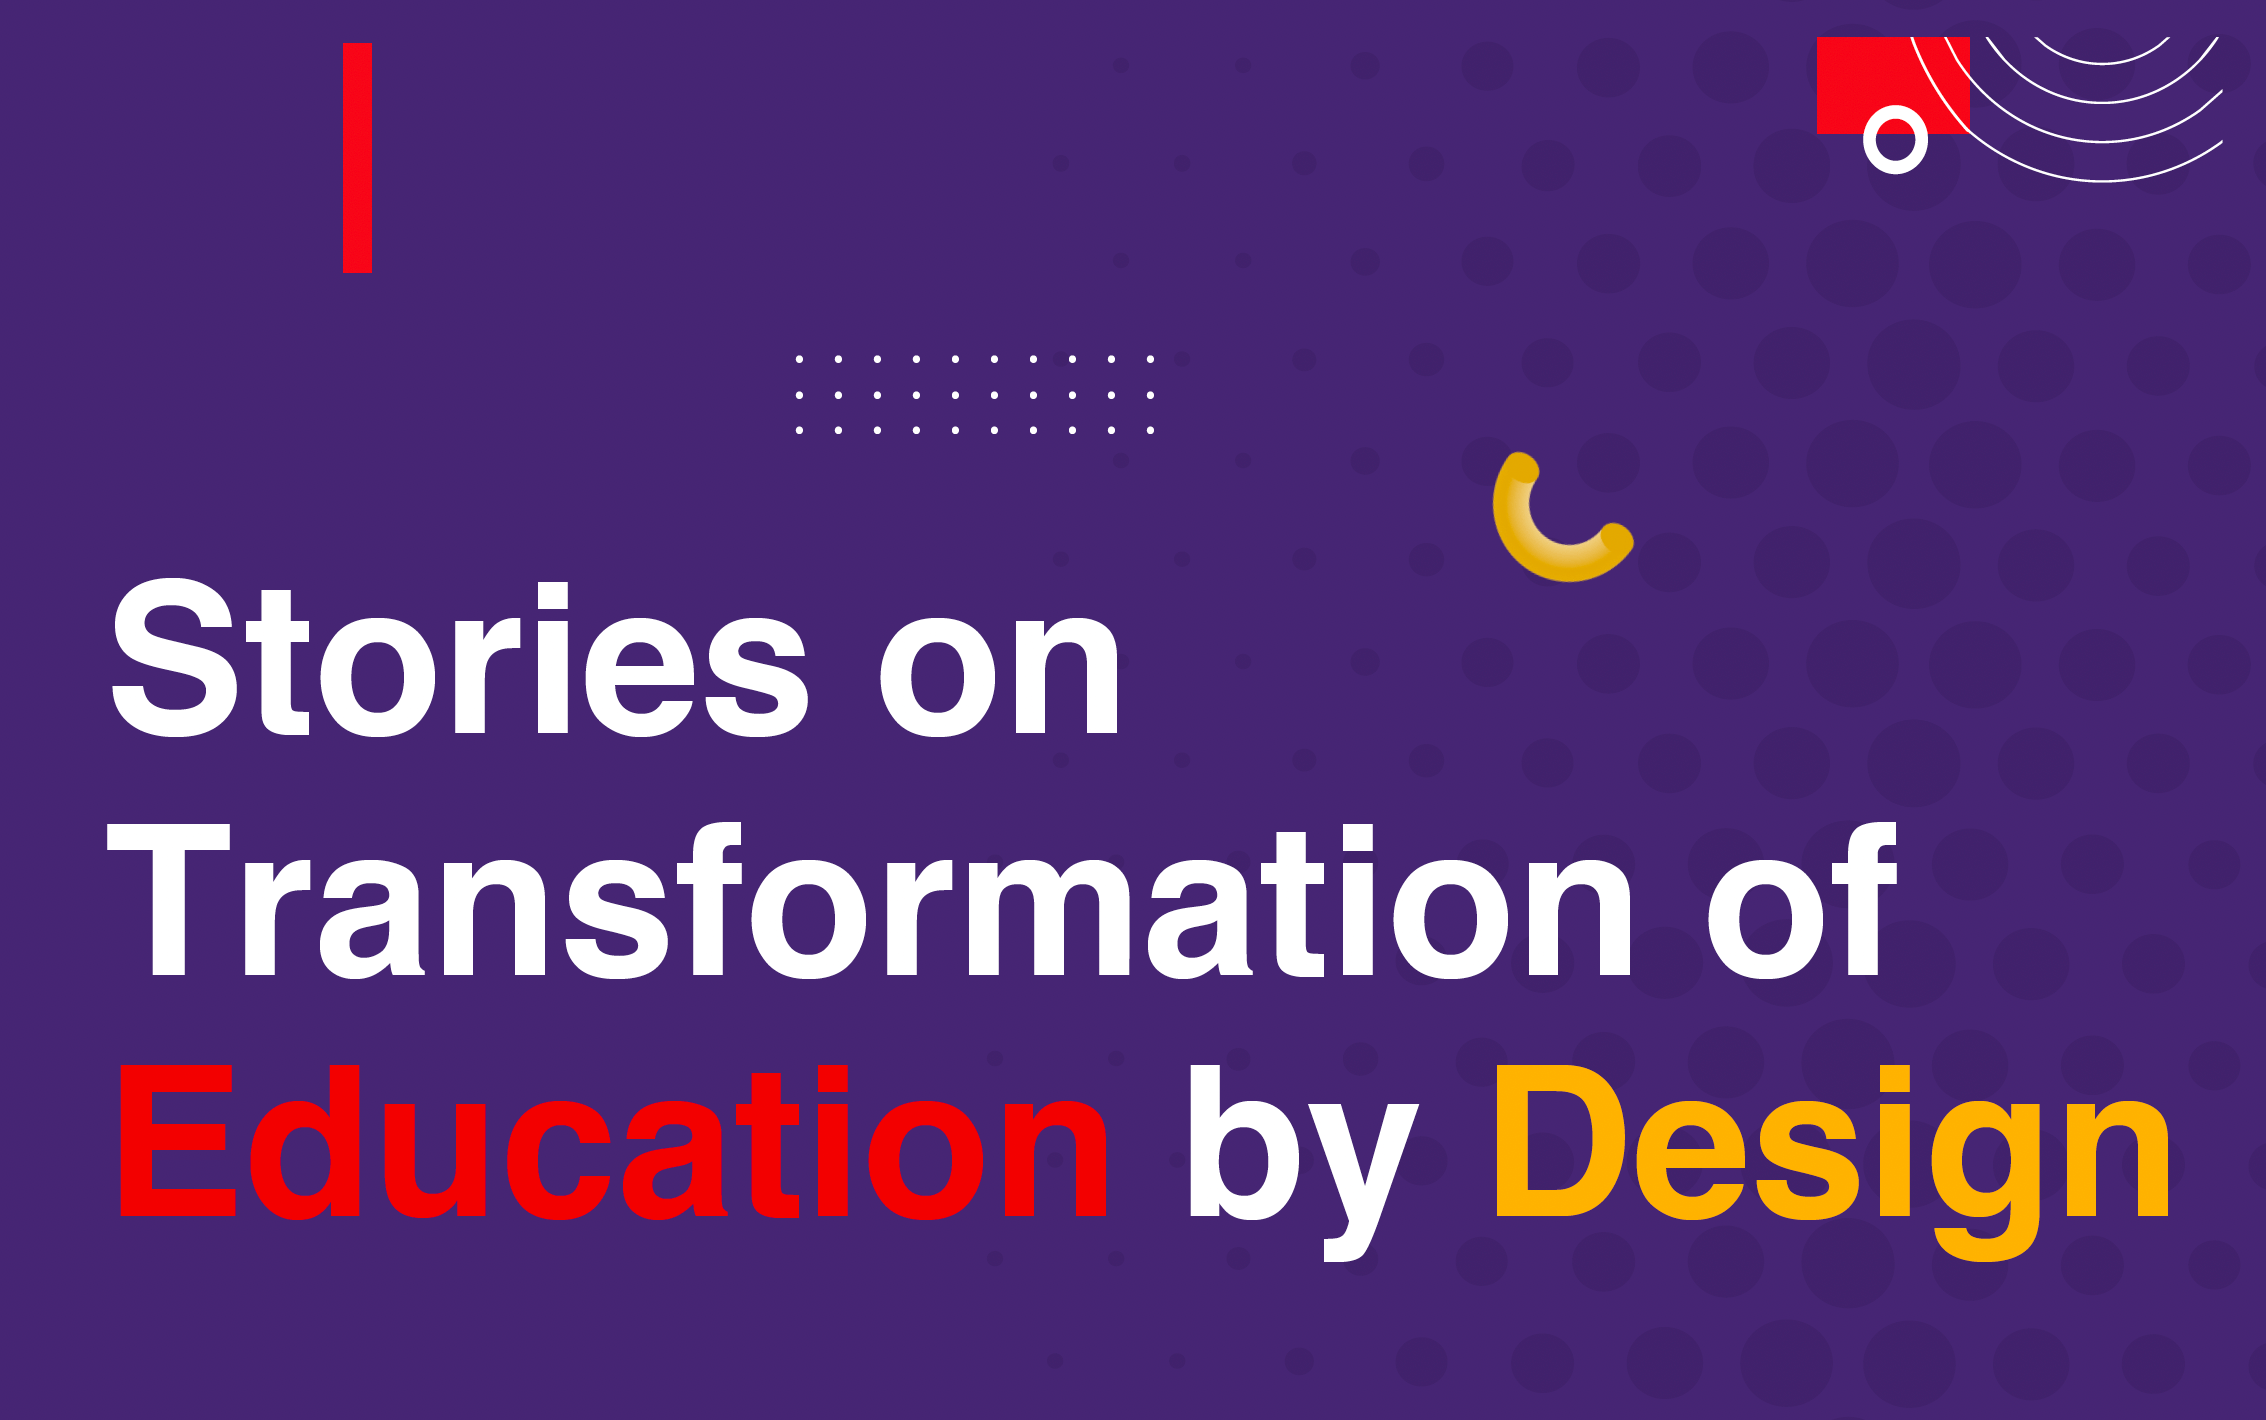 Stories on Transformation of Education by Design